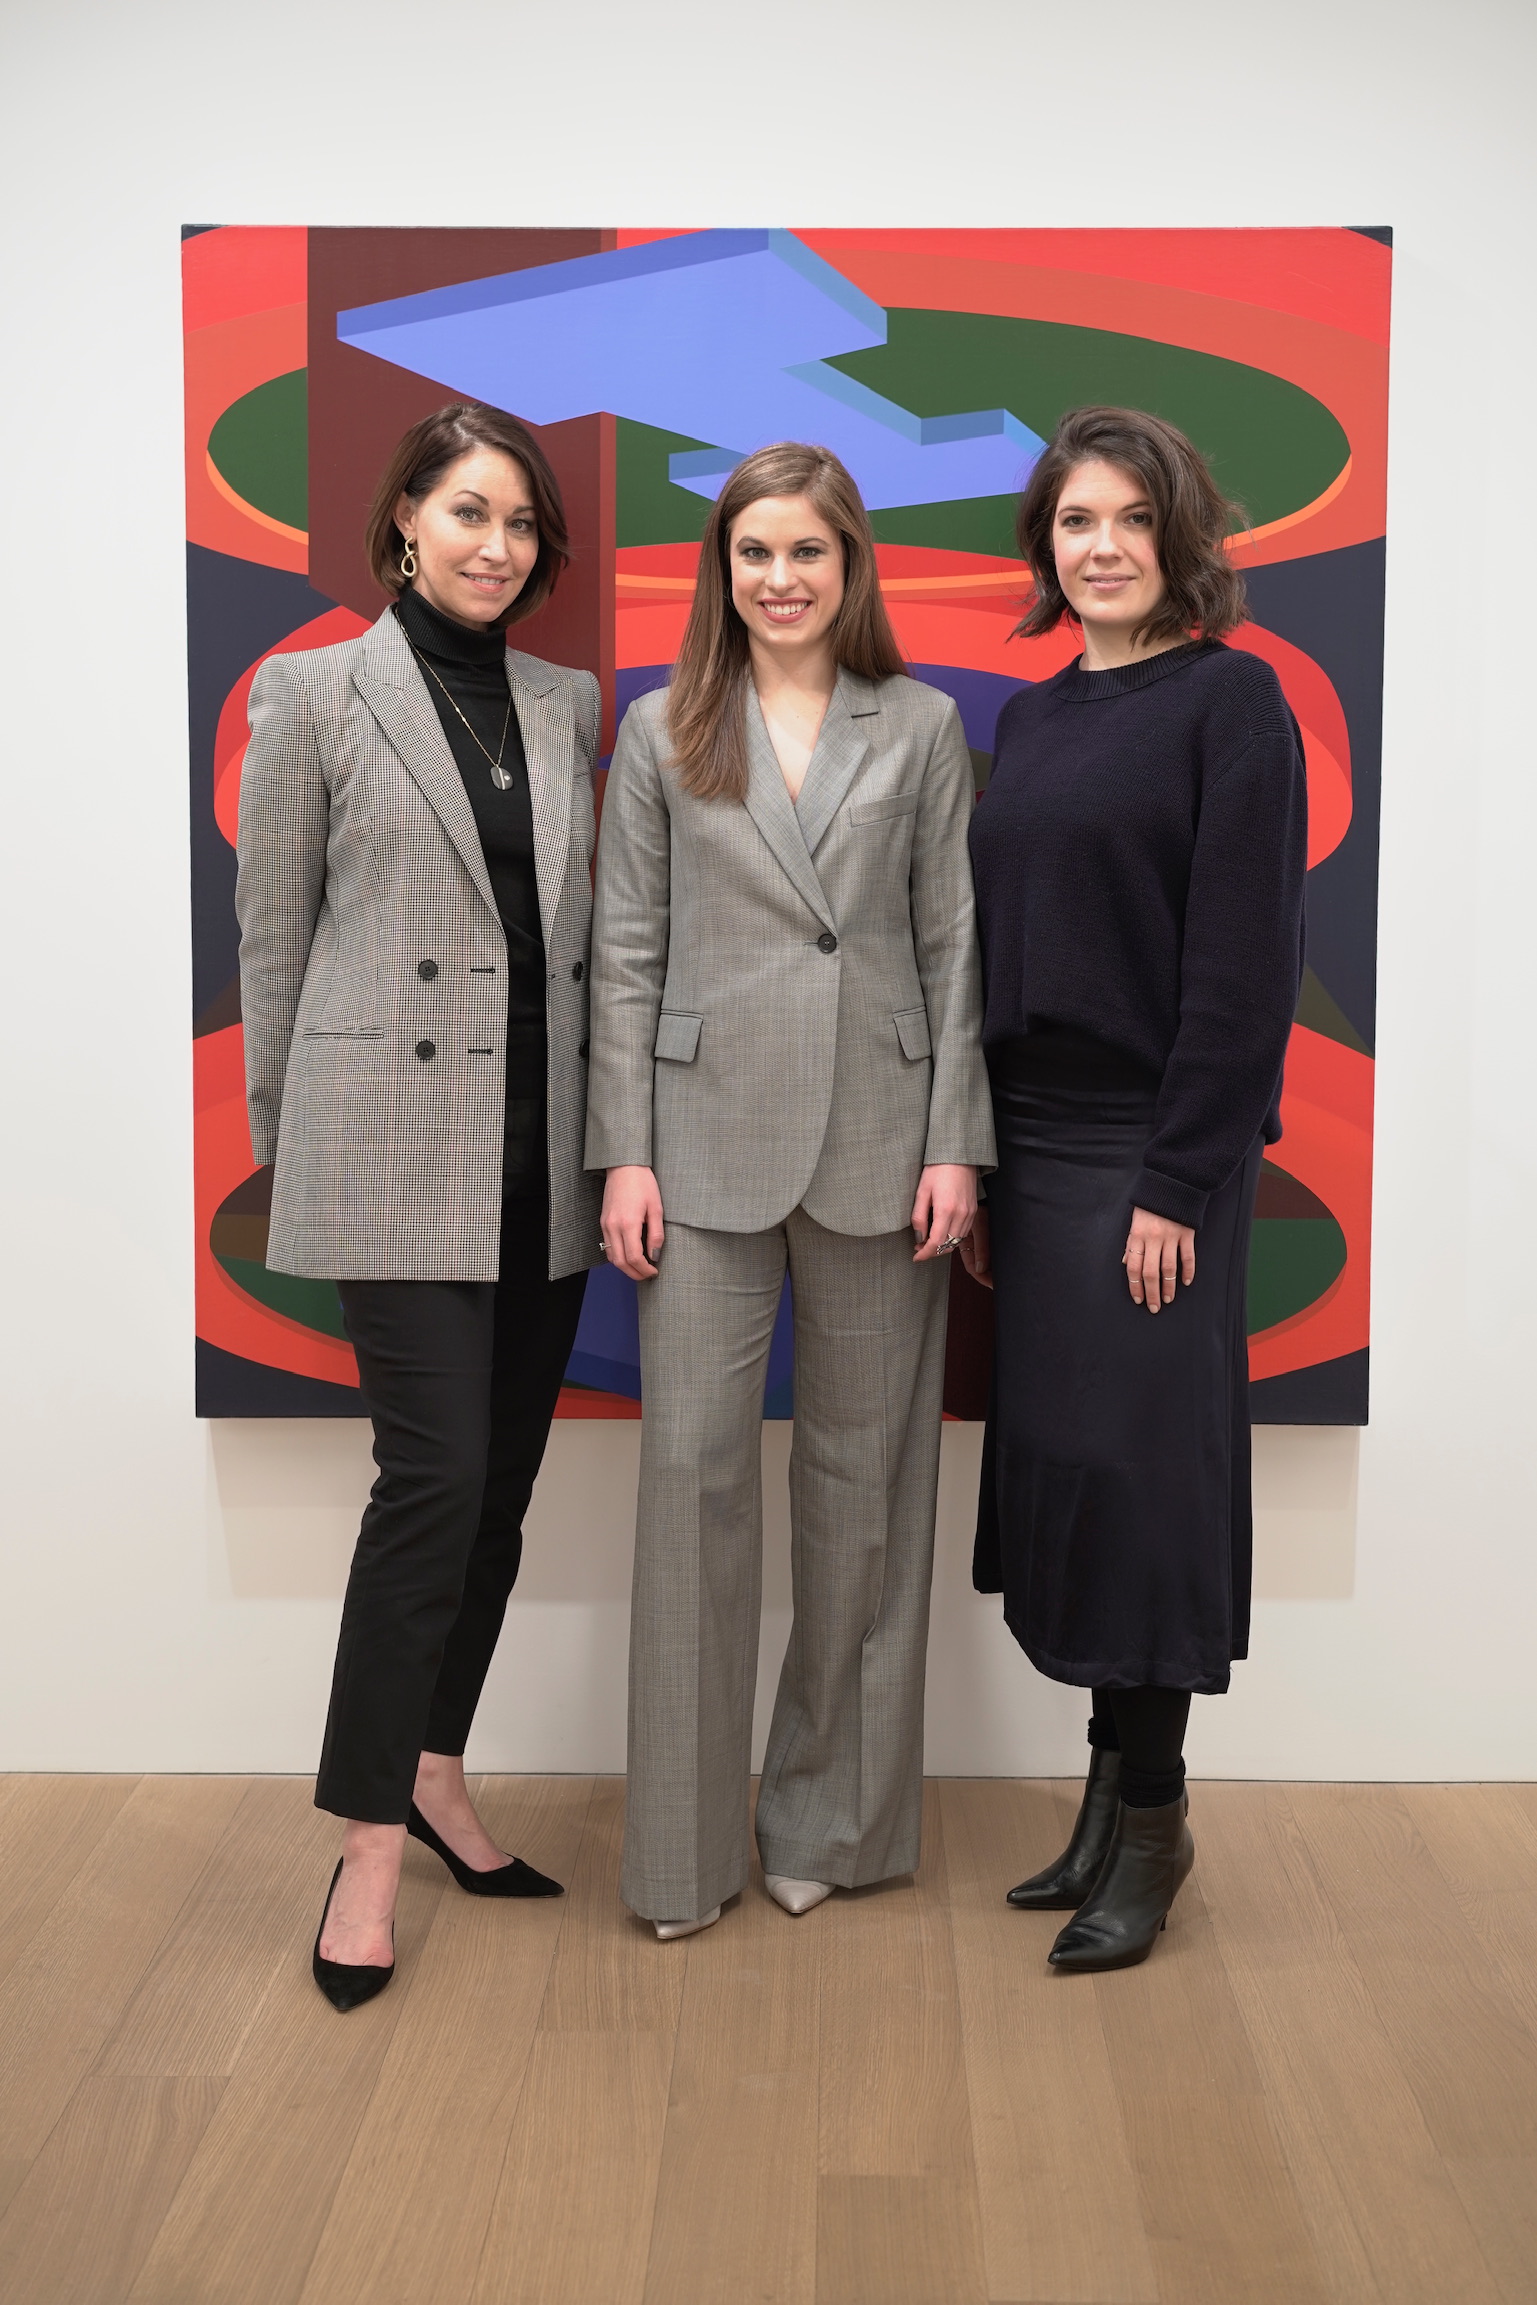 three women standing in front of a painting: one wearing a plaid blazer with black pants, a black top and black pumps wearing a long pendant necklace; the other is wearing a grey suit with grey heels and the last is wearing a navy sweater and skirt with booties. They all have brown hair